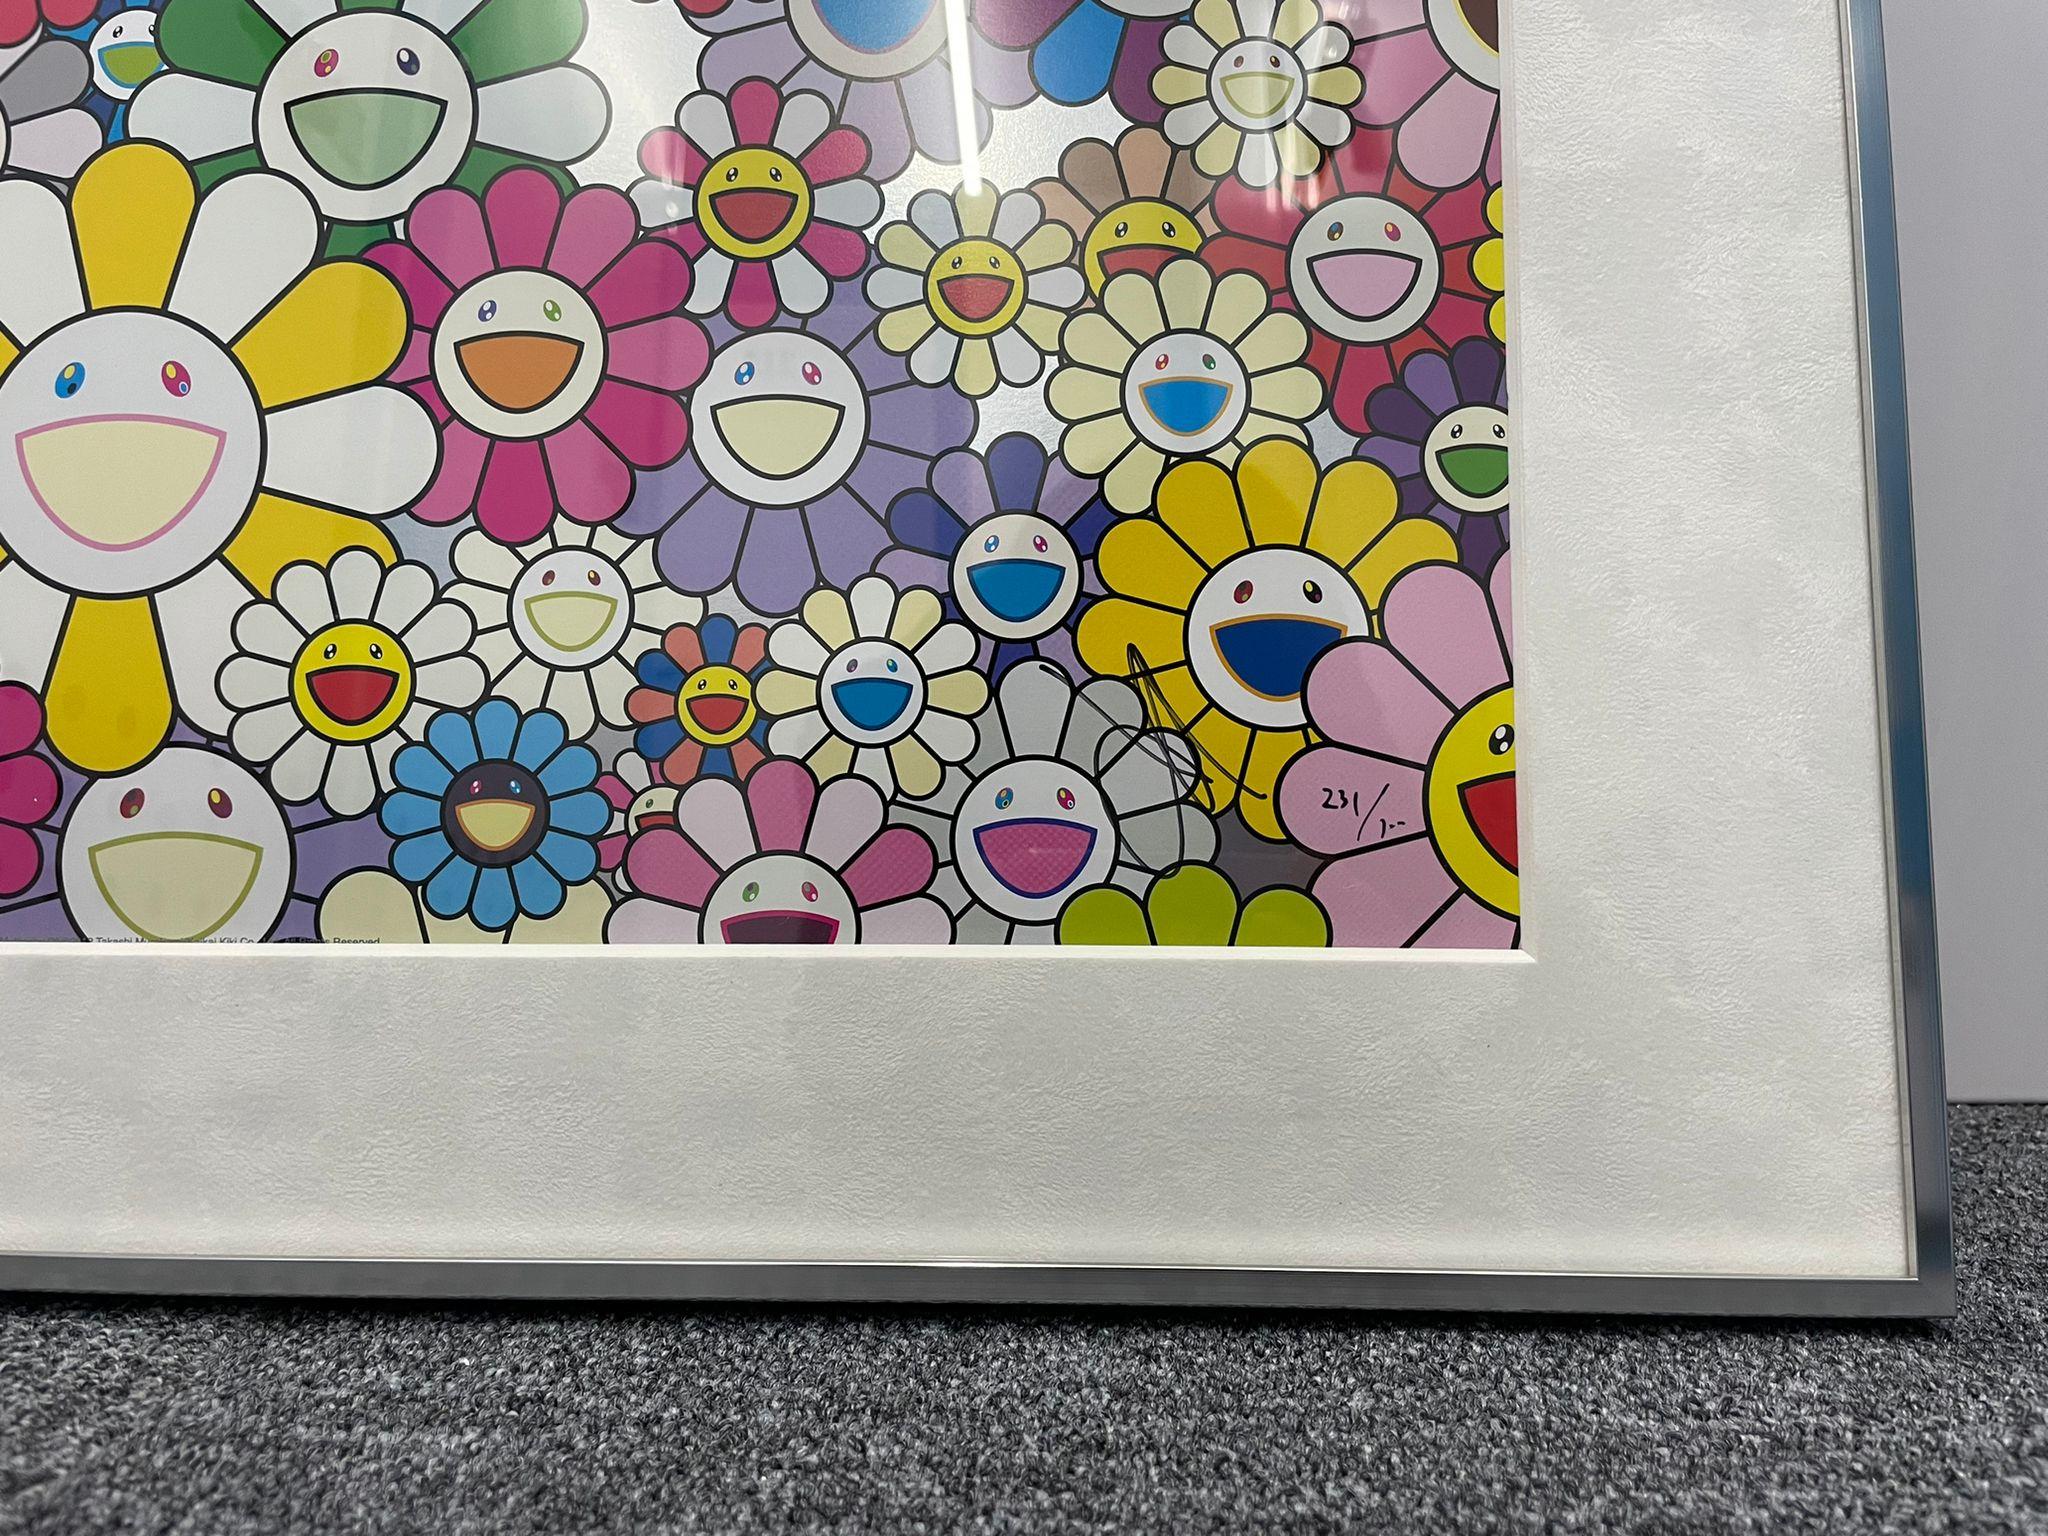 Shangri-La Shangri-La Multi Color (2018) by Takashi Murakami
Offset print, numbered and signed by the artist
Framed
29 ¹/₁₆ × 20 ⁵⁵/₆₄ in
73.8 × 53.0cm
Edition  231/300

Takashi Murakami is best known for his contemporary combination of fine art and